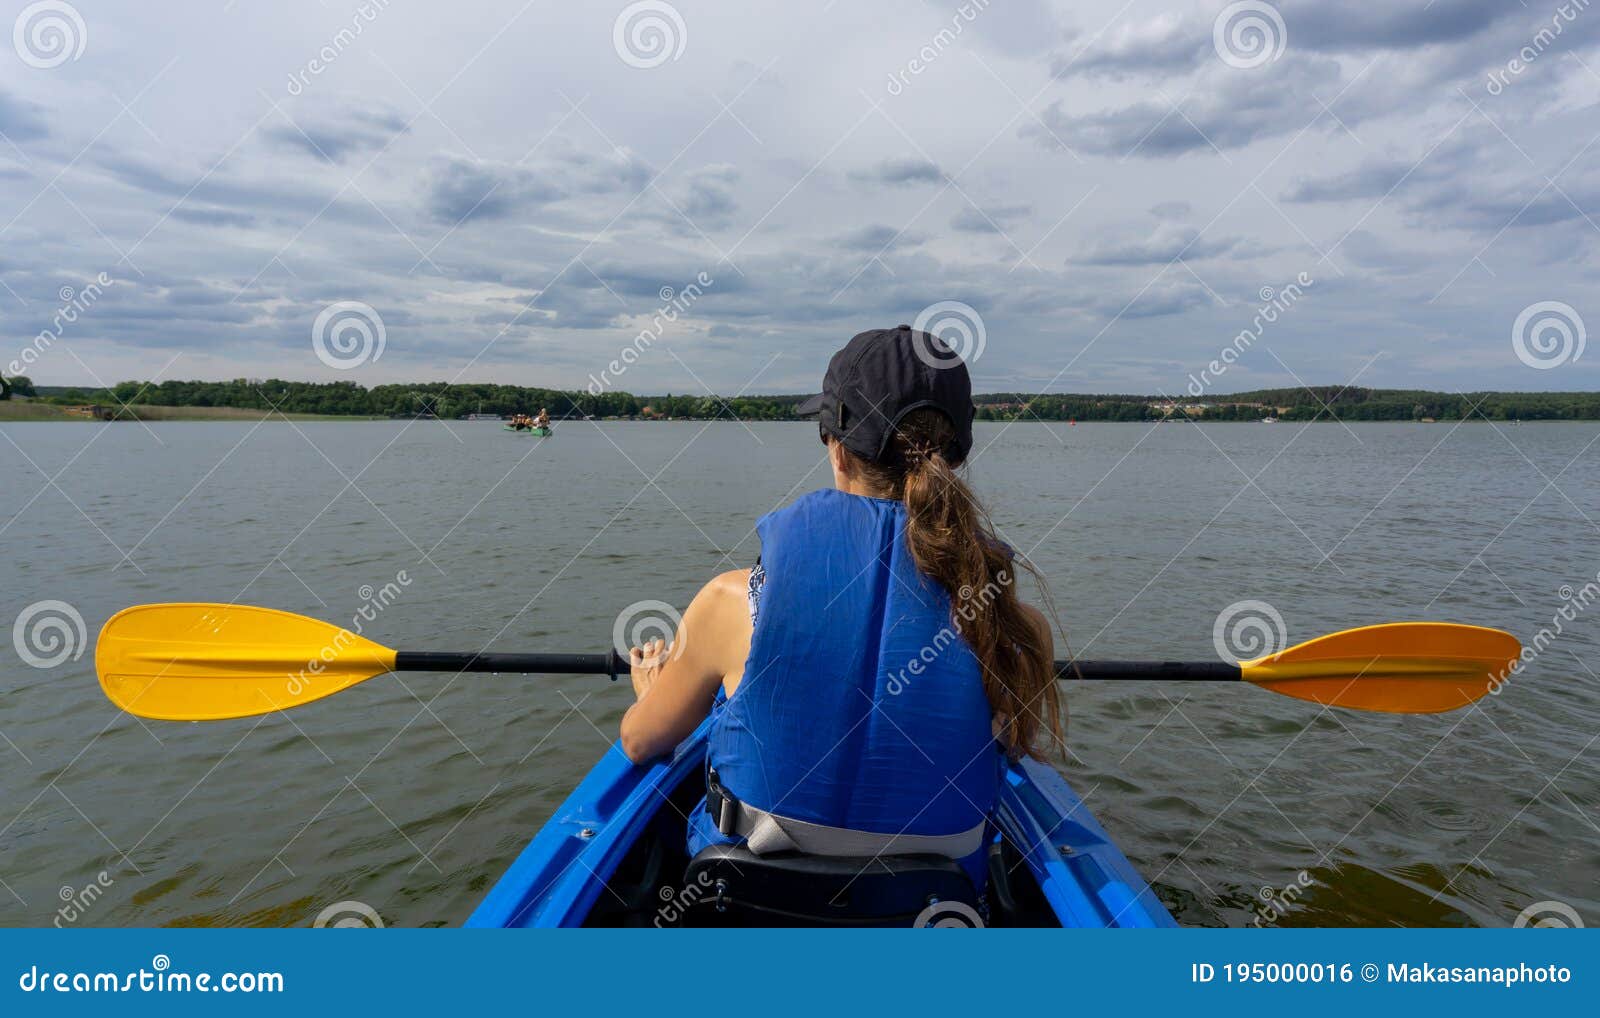 Female Kayaker on Lake Woblitz Enjoys a Day on the Water Stock Photo ...